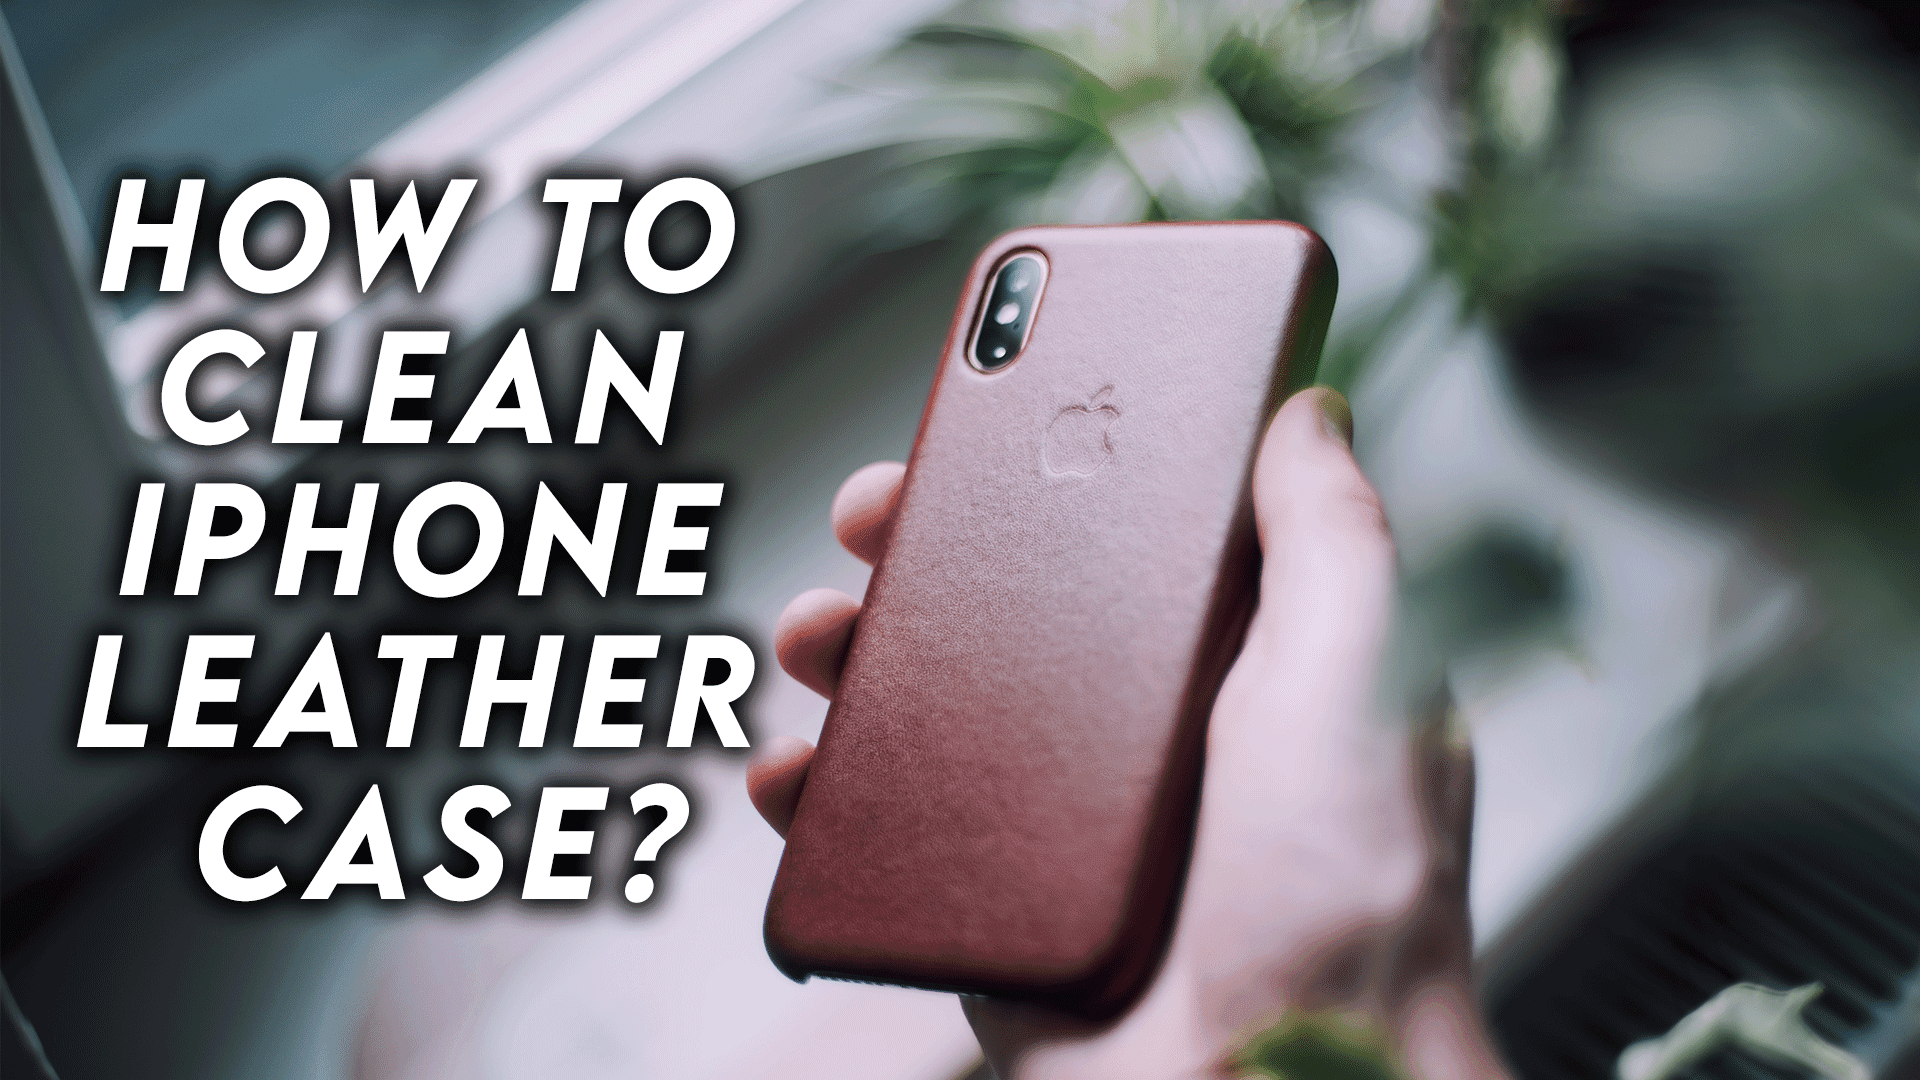 How To Clean iPhone Leather Case?